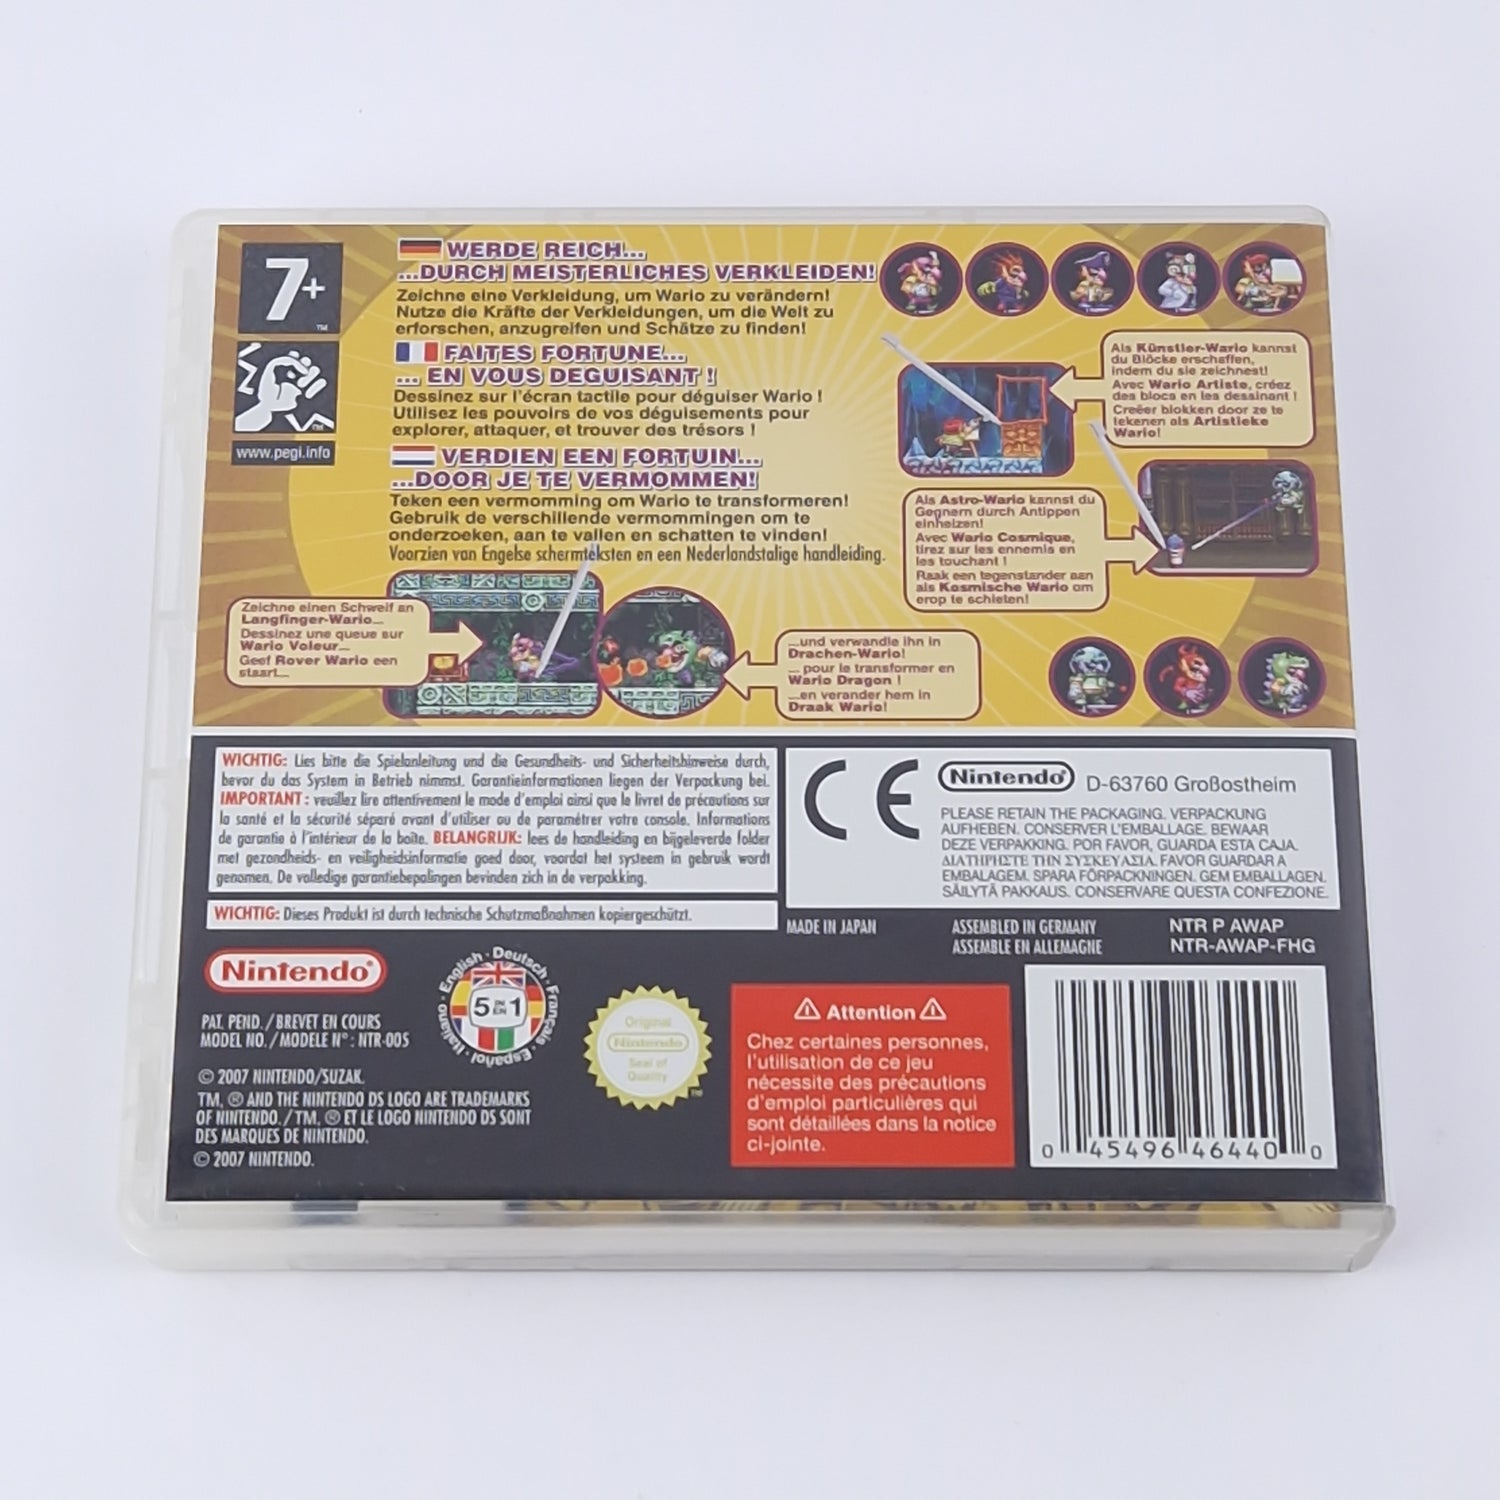 Nintendo DS game: Wario Master of Disguise - OVP instructions PAL game | 3DS